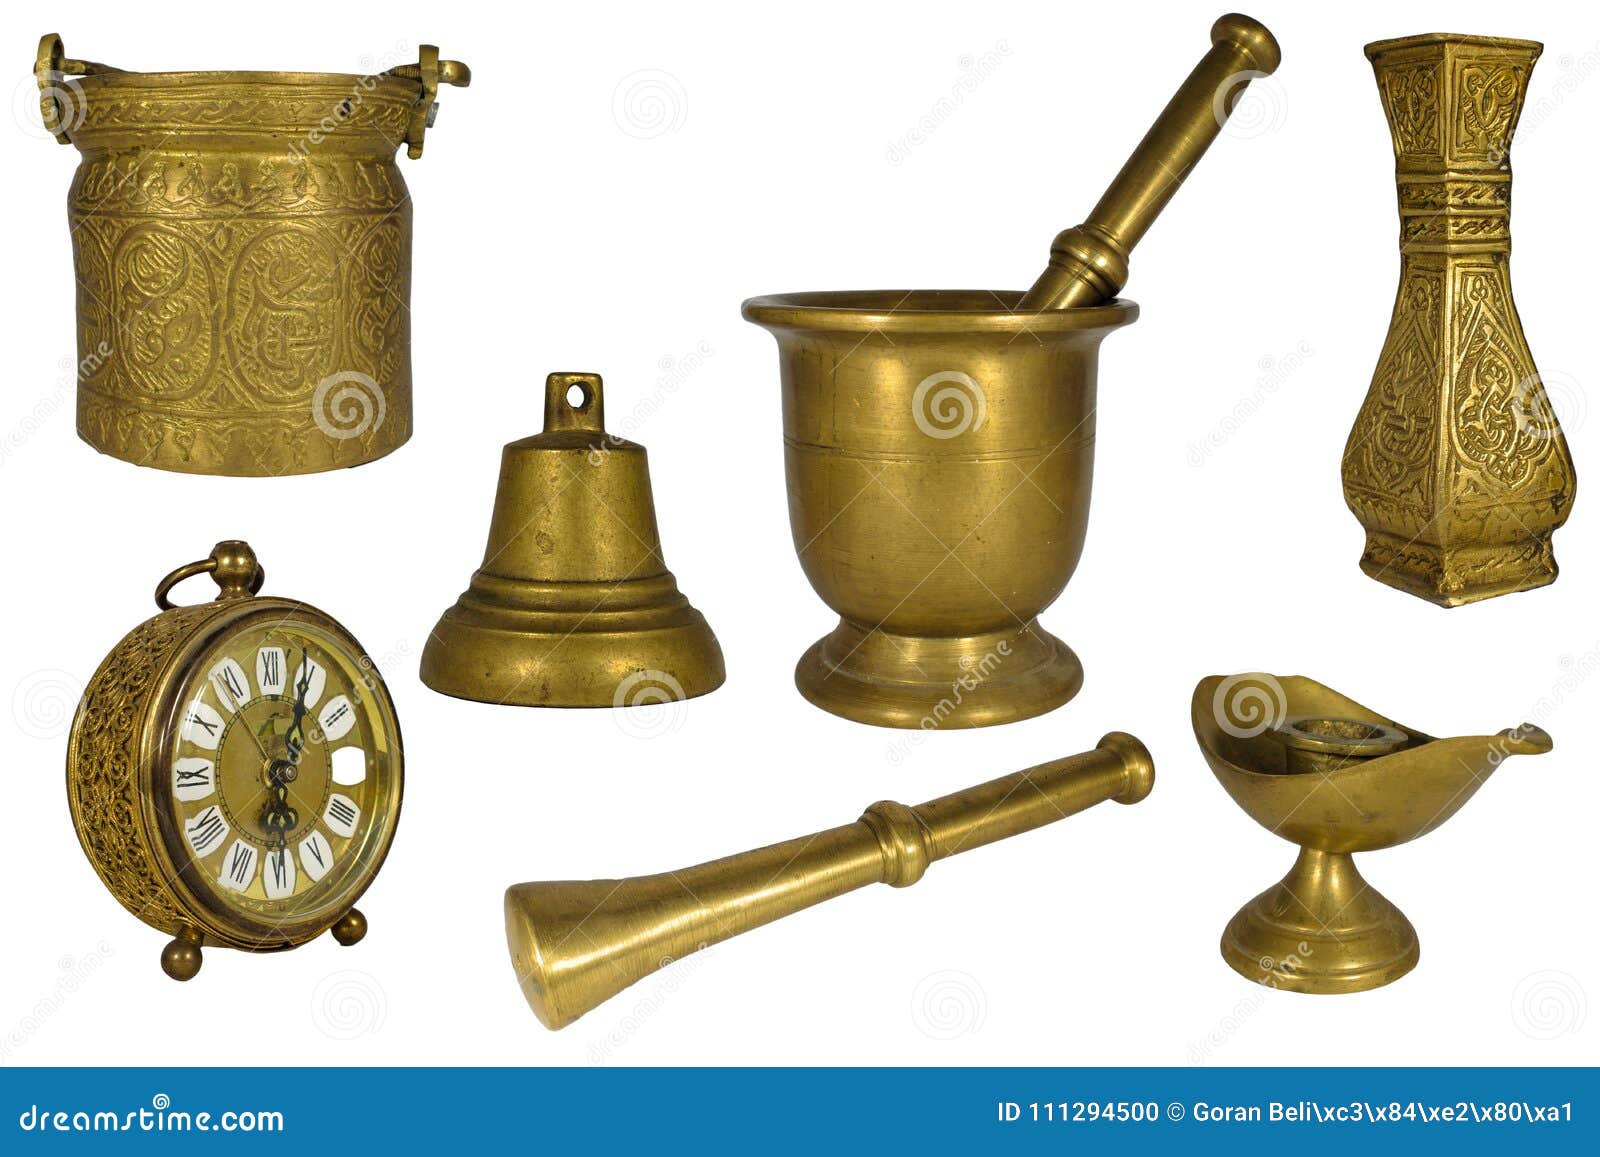 Beautiful Set or Collection of Vintage Brass or Golden Decorative House  Items Isolated on White: Clock, Pestle, Mortar, Bell Stock Photo - Image of  isolated, collection: 111294500